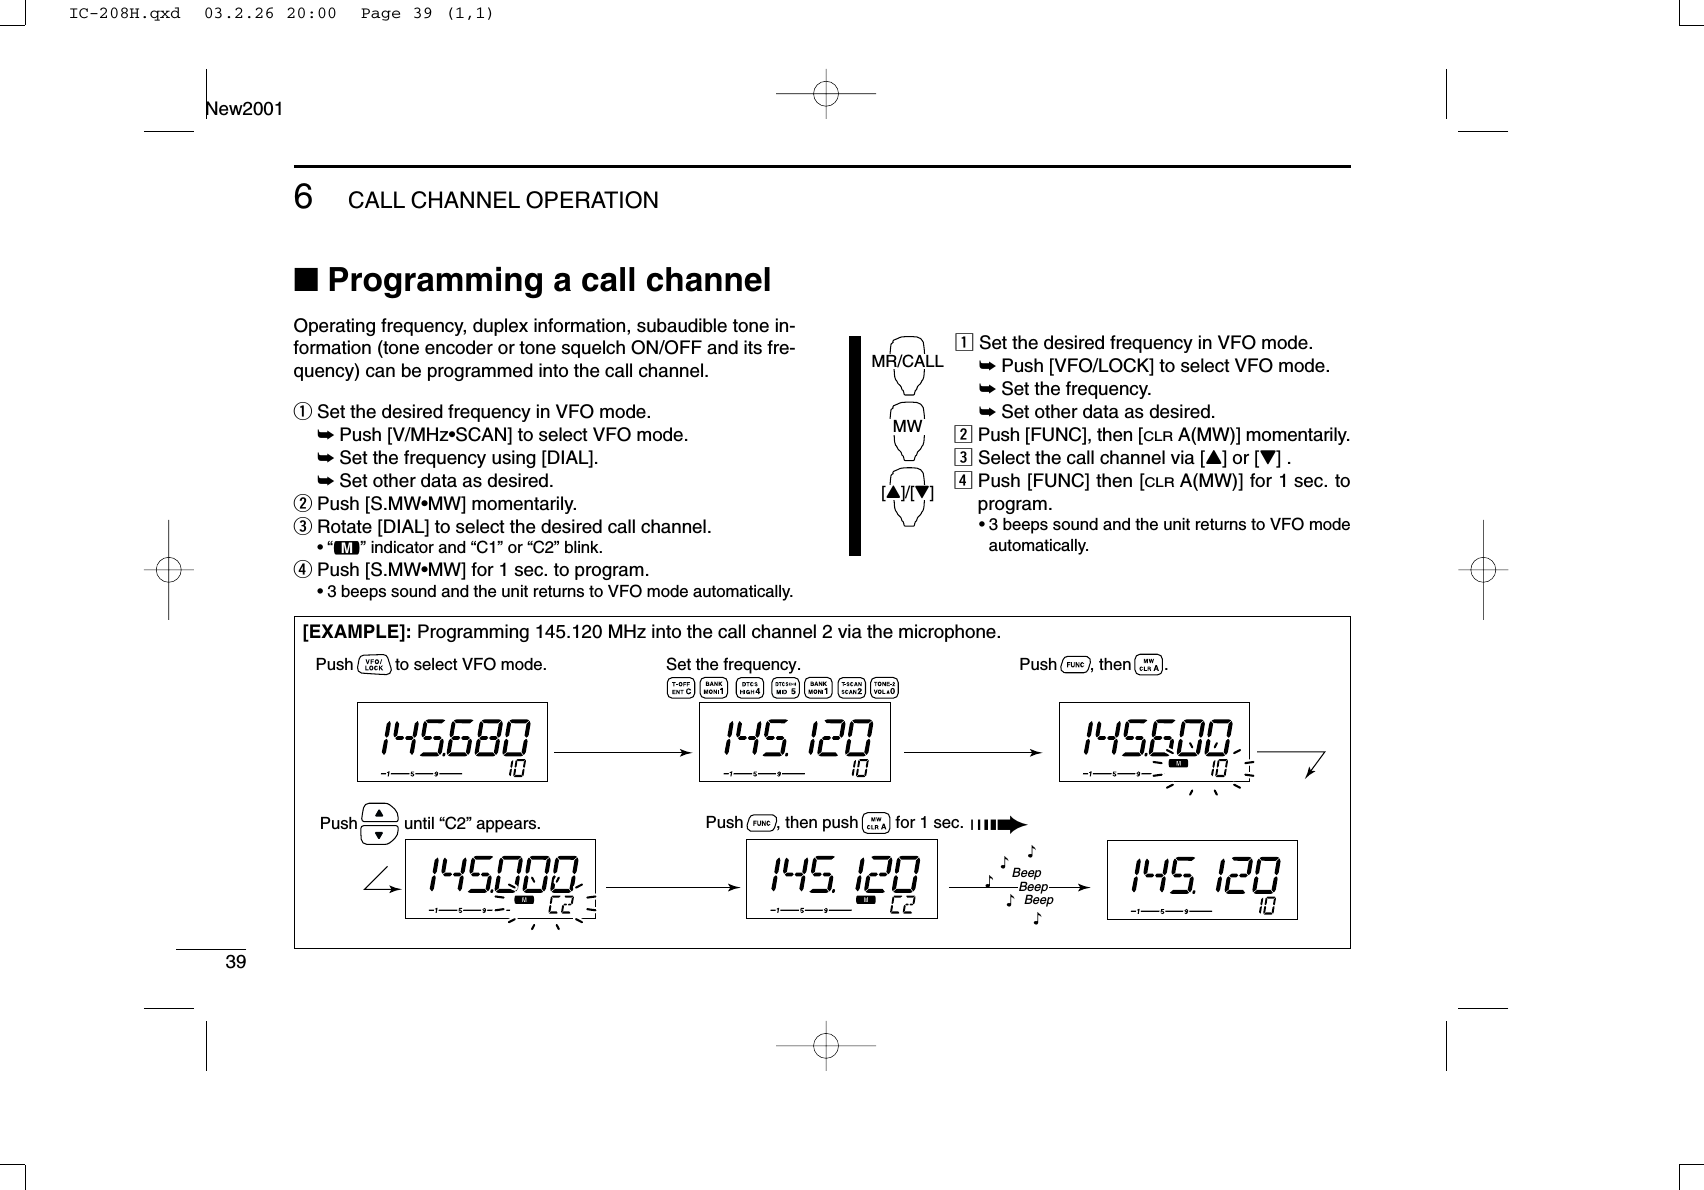 396CALL CHANNEL OPERATIONNew2001■Programming a call channelOperating frequency, duplex information, subaudible tone in-formation (tone encoder or tone squelch ON/OFF and its fre-quency) can be programmed into the call channel.qSet the desired frequency in VFO mode.➥Push [V/MHz•SCAN] to select VFO mode.➥Set the frequency using [DIAL].➥Set other data as desired.wPush [S.MW•MW] momentarily.eRotate [DIAL] to select the desired call channel.•“!” indicator and “C1” or “C2” blink.rPush [S.MW•MW] for 1 sec. to program.•3 beeps sound and the unit returns to VFO mode automatically.zSet the desired frequency in VFO mode.➥Push [VFO/LOCK] to select VFO mode.➥Set the frequency.➥Set other data as desired.xPush [FUNC], then [CLRA(MW)] momentarily.cSelect the call channel via [Y] or [Z] .vPush [FUNC] then [CLRA(MW)] for 1 sec. toprogram.•3 beeps sound and the unit returns to VFO modeautomatically.MR/CALLMW[Y]/[Z][EXAMPLE]: Programming 145.120 MHz into the call channel 2 via the microphone.Set the frequency.Push         to select VFO mode. Push       , then       .Push       , then push        for 1 sec. ➠Push          until “C2” appears.BeepBeepBeep“““““IC-208H.qxd  03.2.26 20:00  Page 39 (1,1)